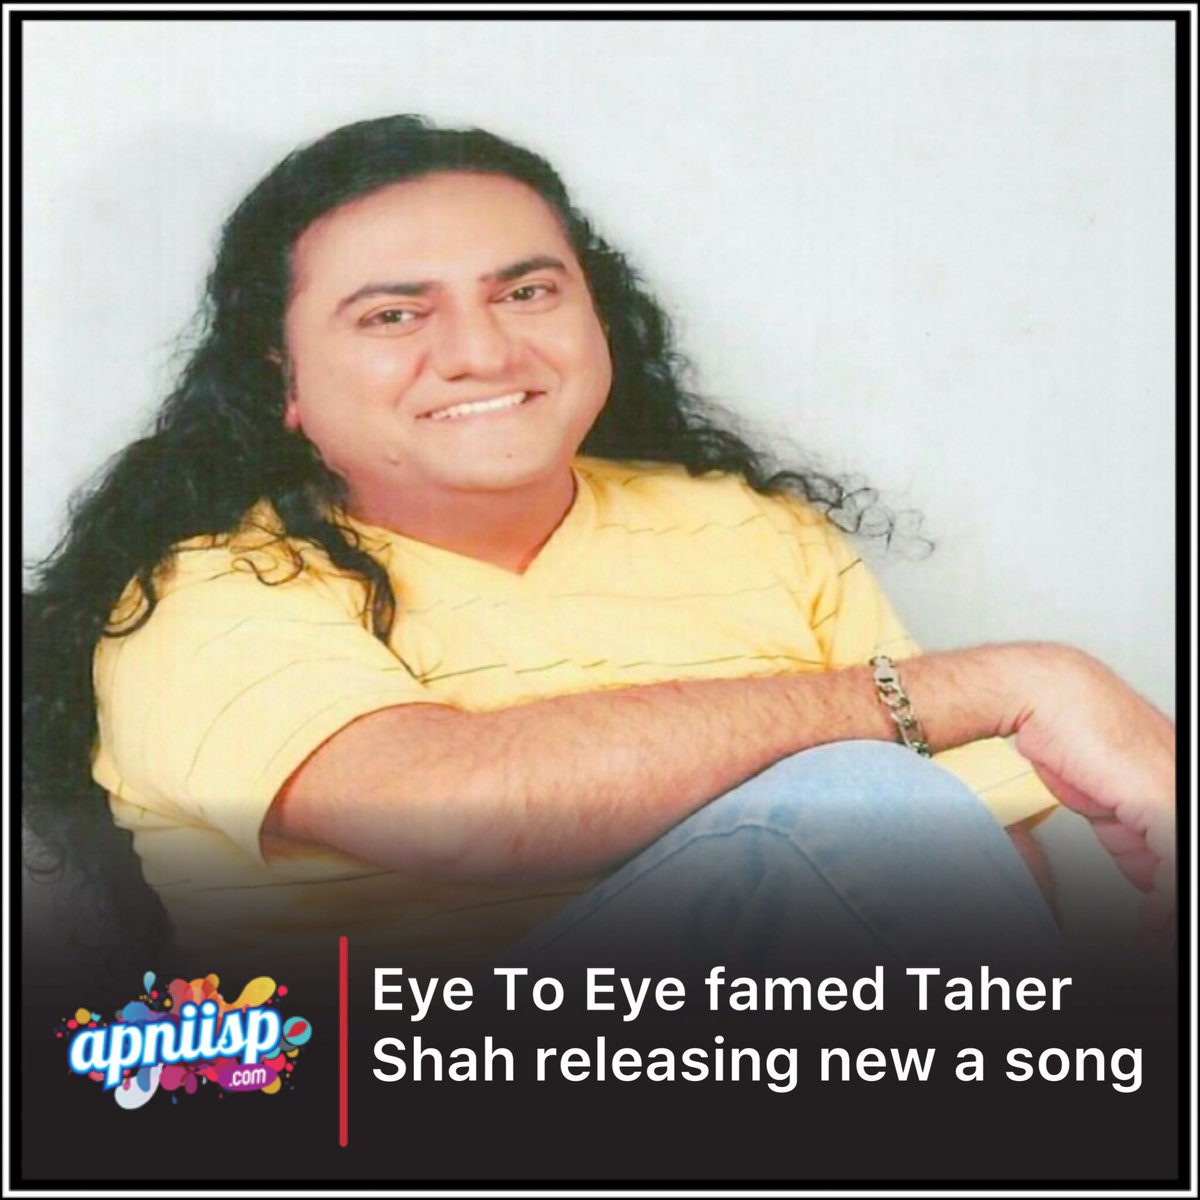 Are you excited? After popular songs like Eye To Eye, Angel and Farishta, Taher Shah is all se to release a new song over the coming weekend ✨

#TaherShah #EyeToEye #Angel #TahirShah